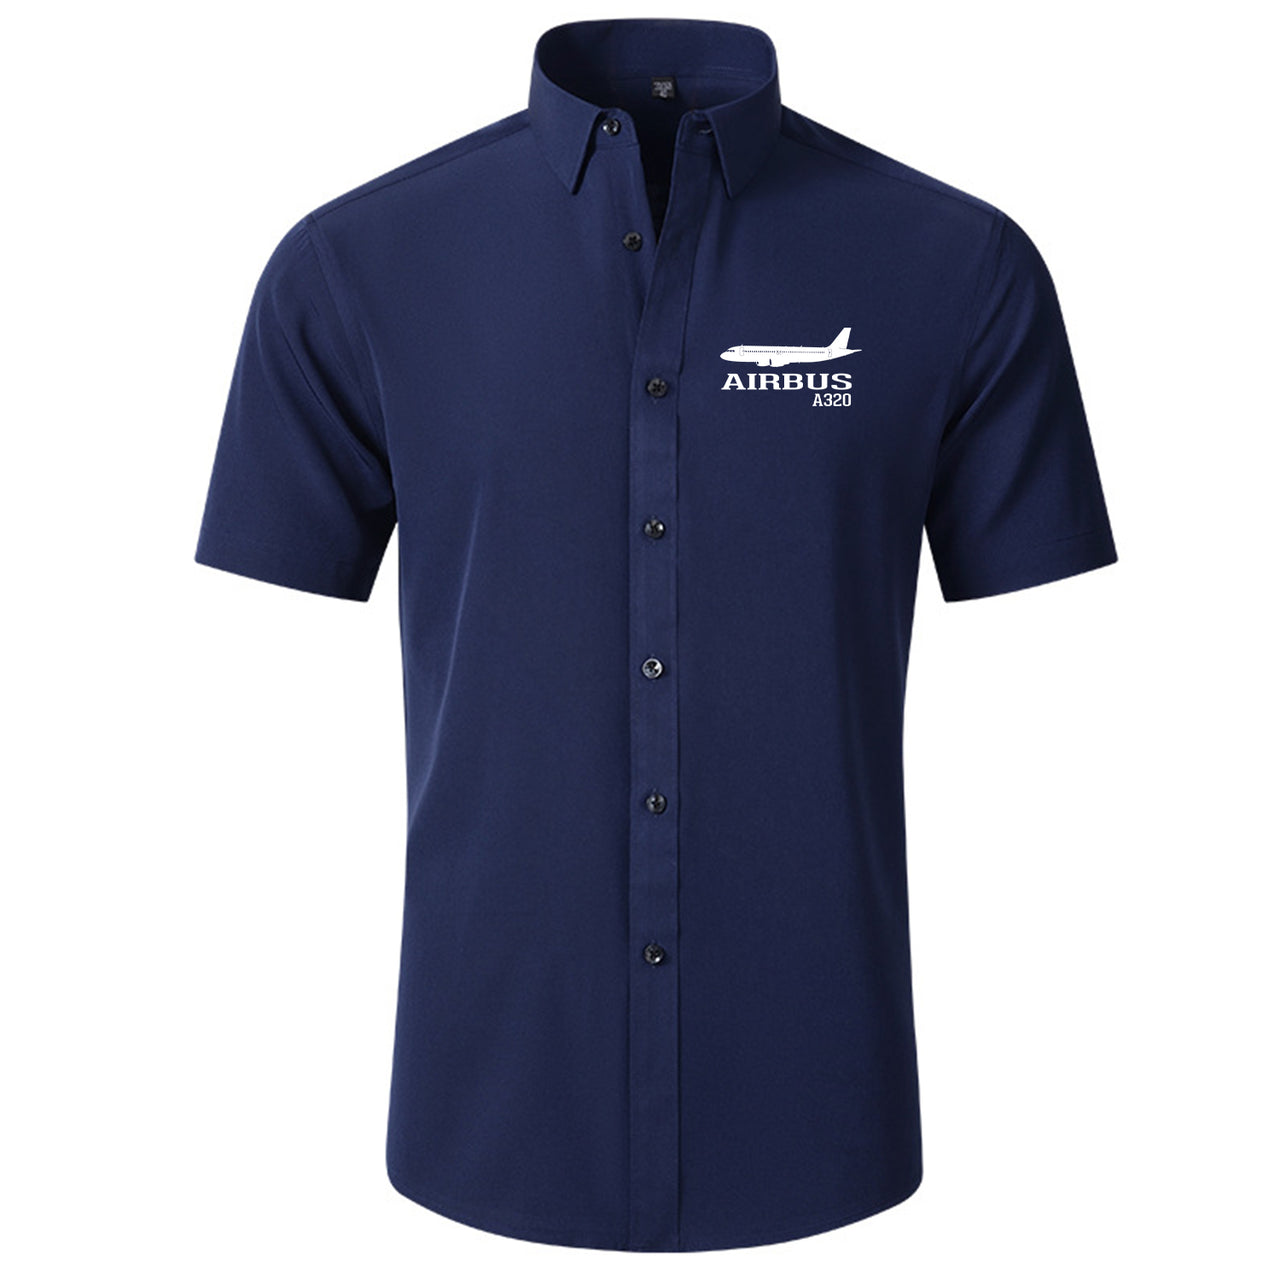 Airbus A320 Printed Designed Short Sleeve Shirts